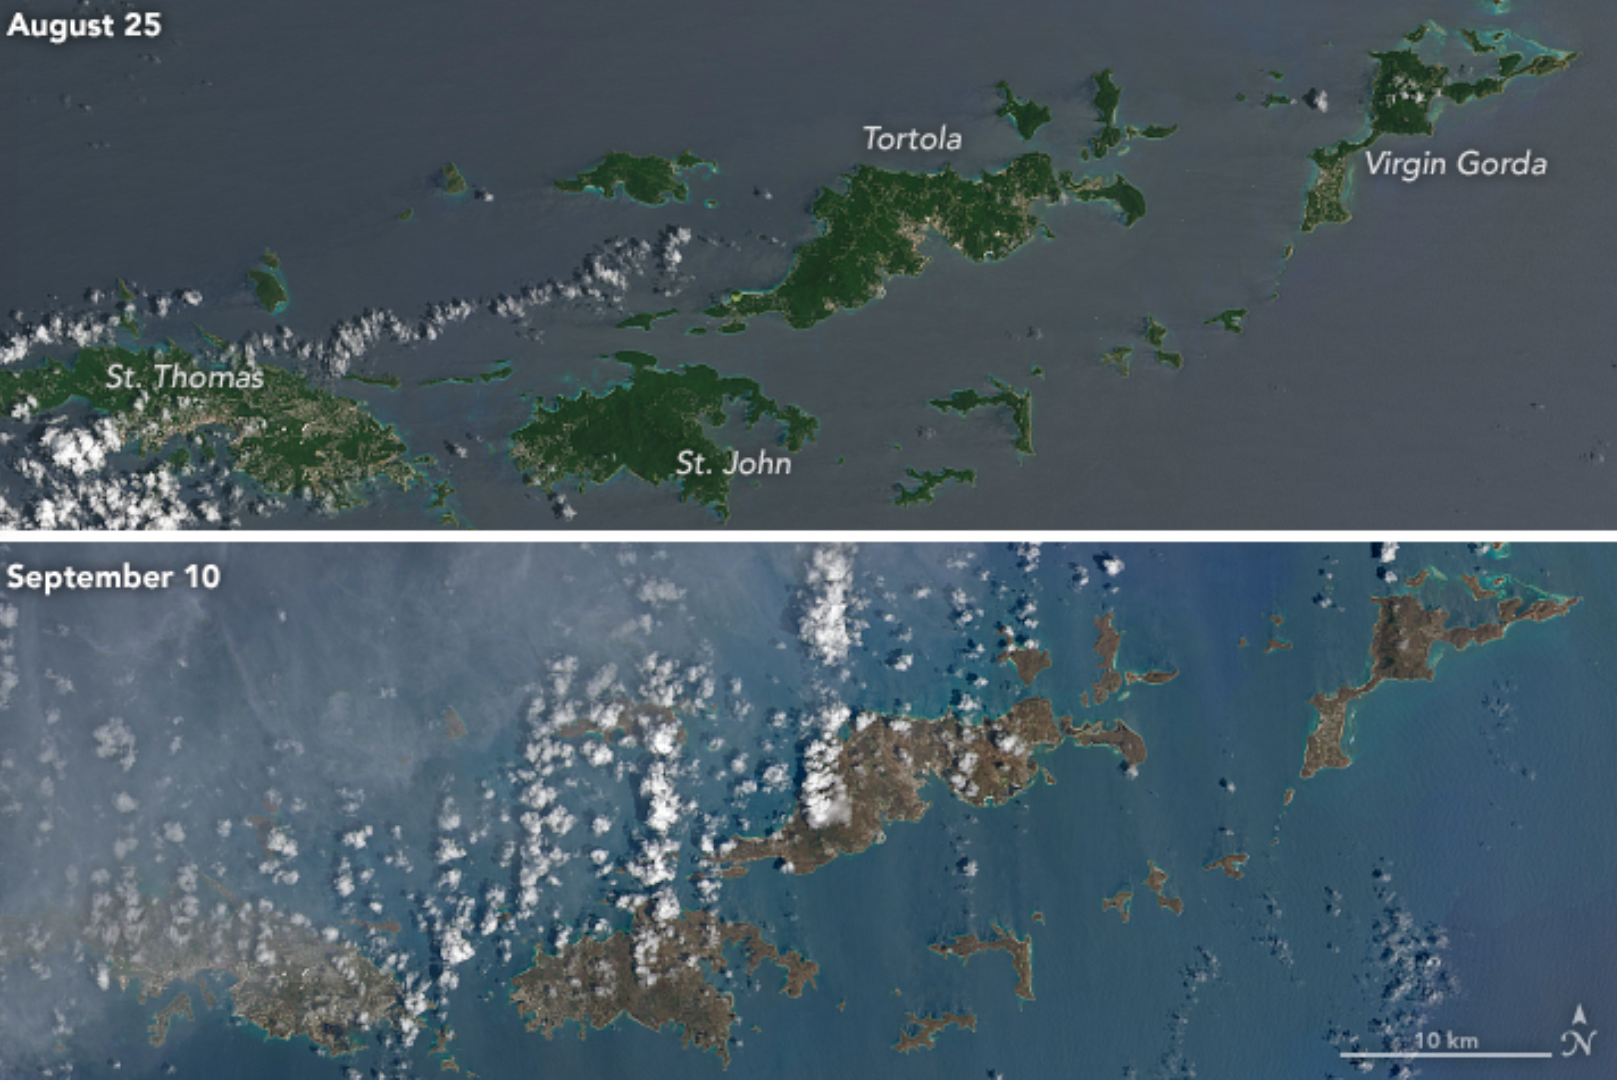 A side-by-side comparison shows the effects of Hurricane Irma, turning islands in the Caribbean brown